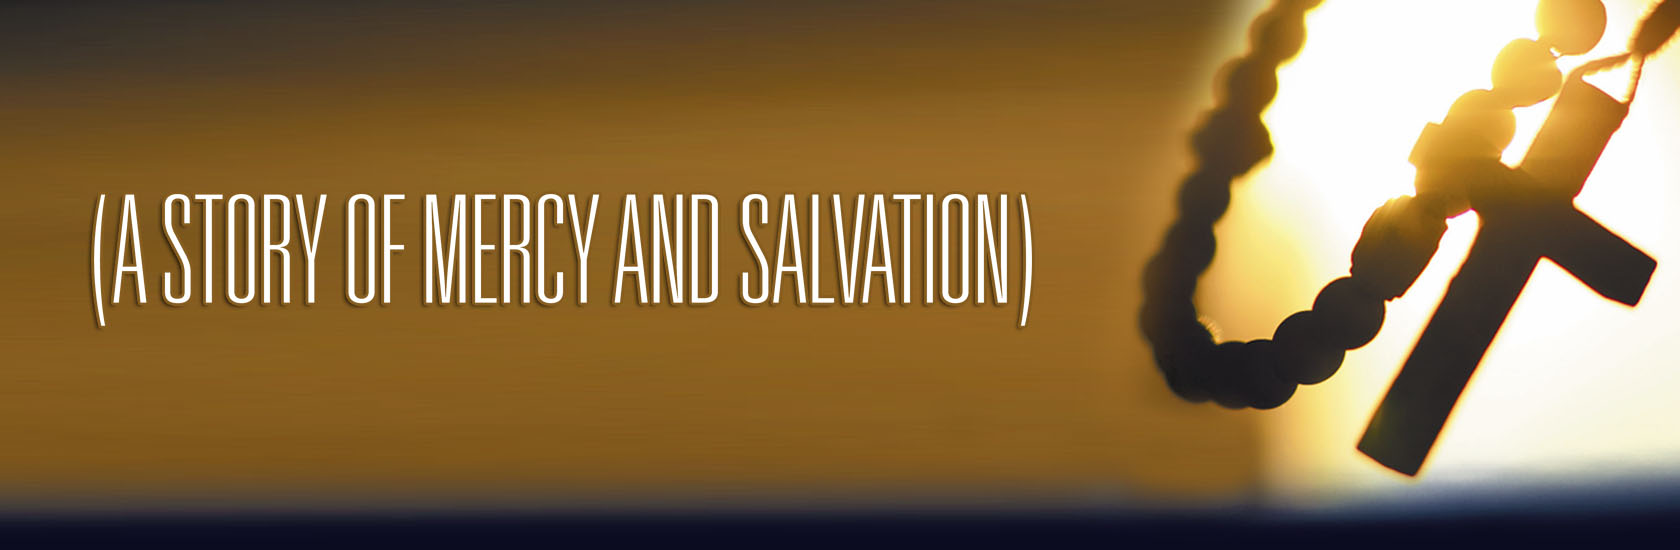 a story of mercy and salvation